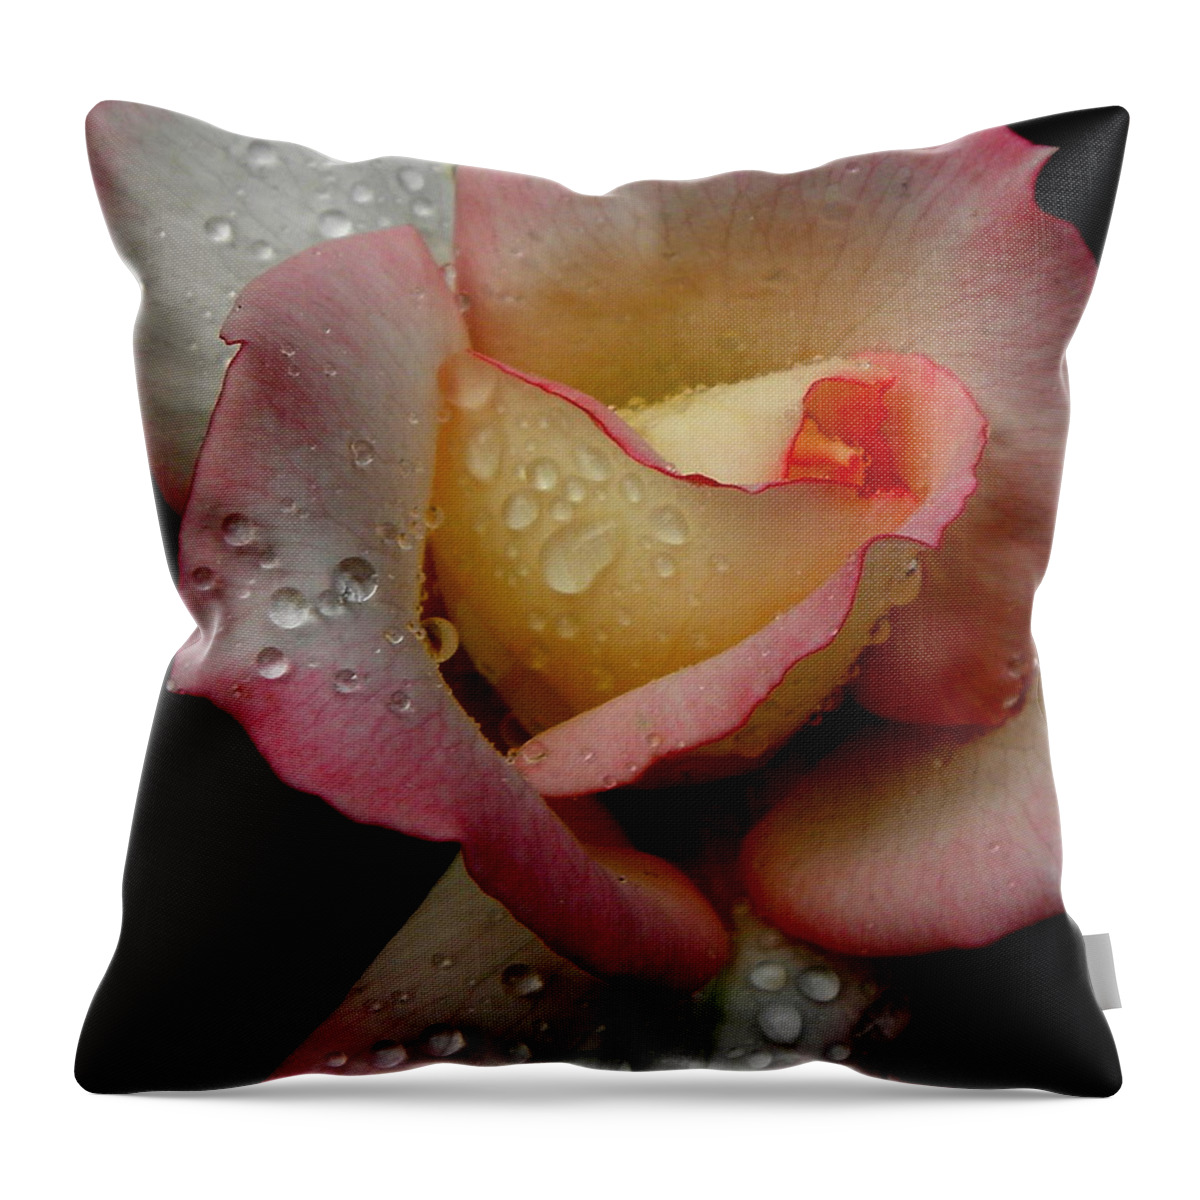 Rose Throw Pillow featuring the photograph Absolute Beauty by Kim Galluzzo Wozniak